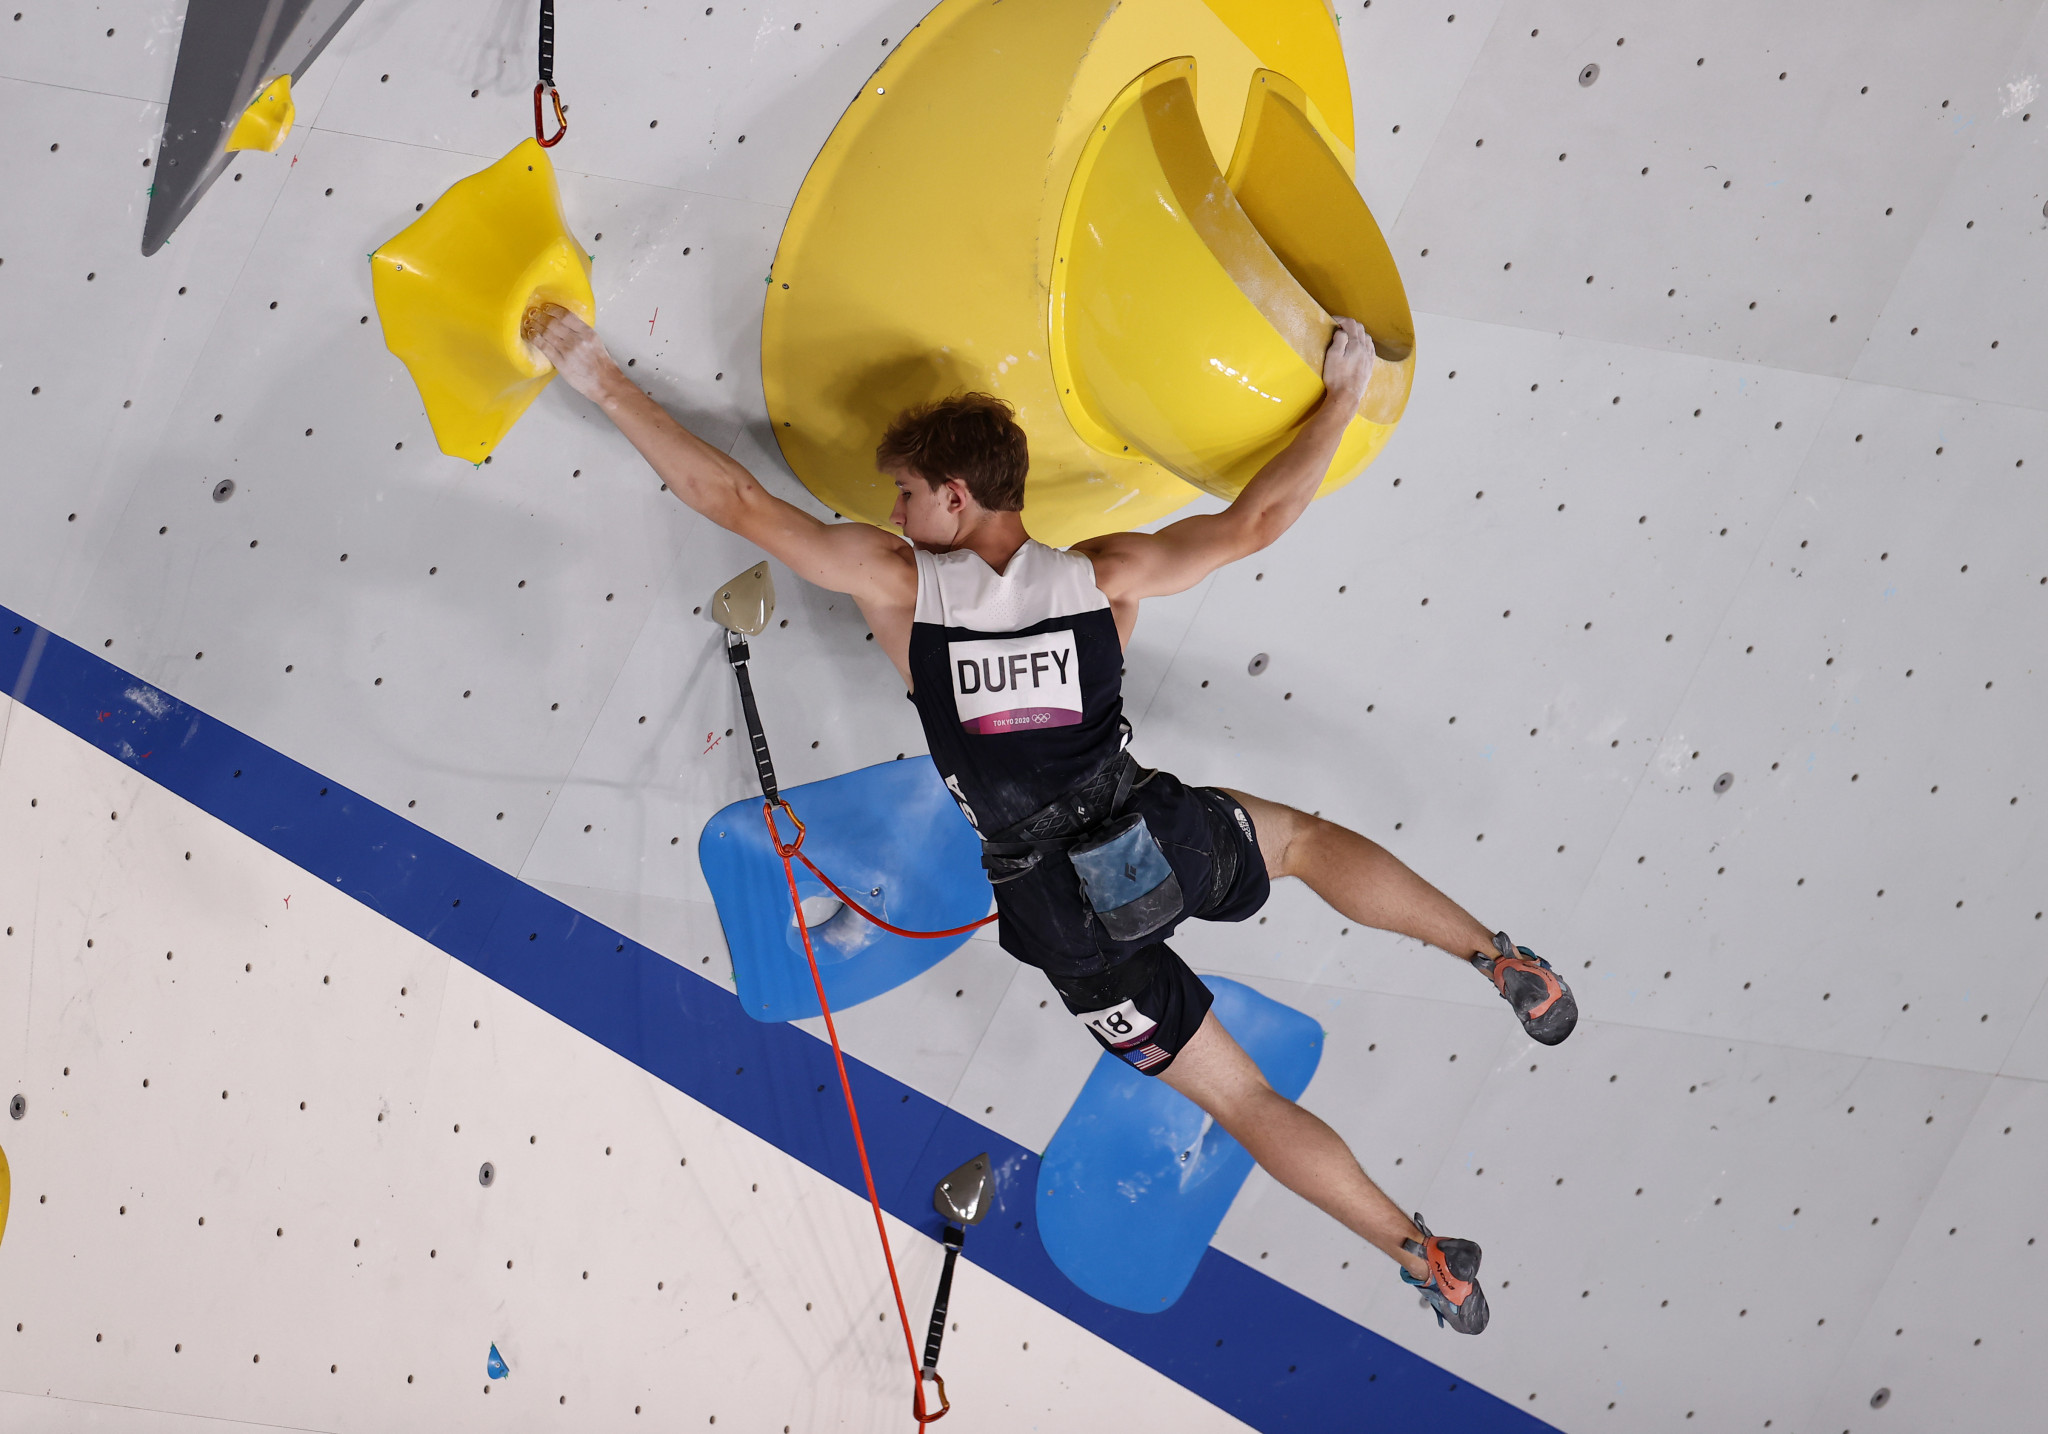 Duffy claims first men's boulder title at IFSC World Cup in Innsbruck